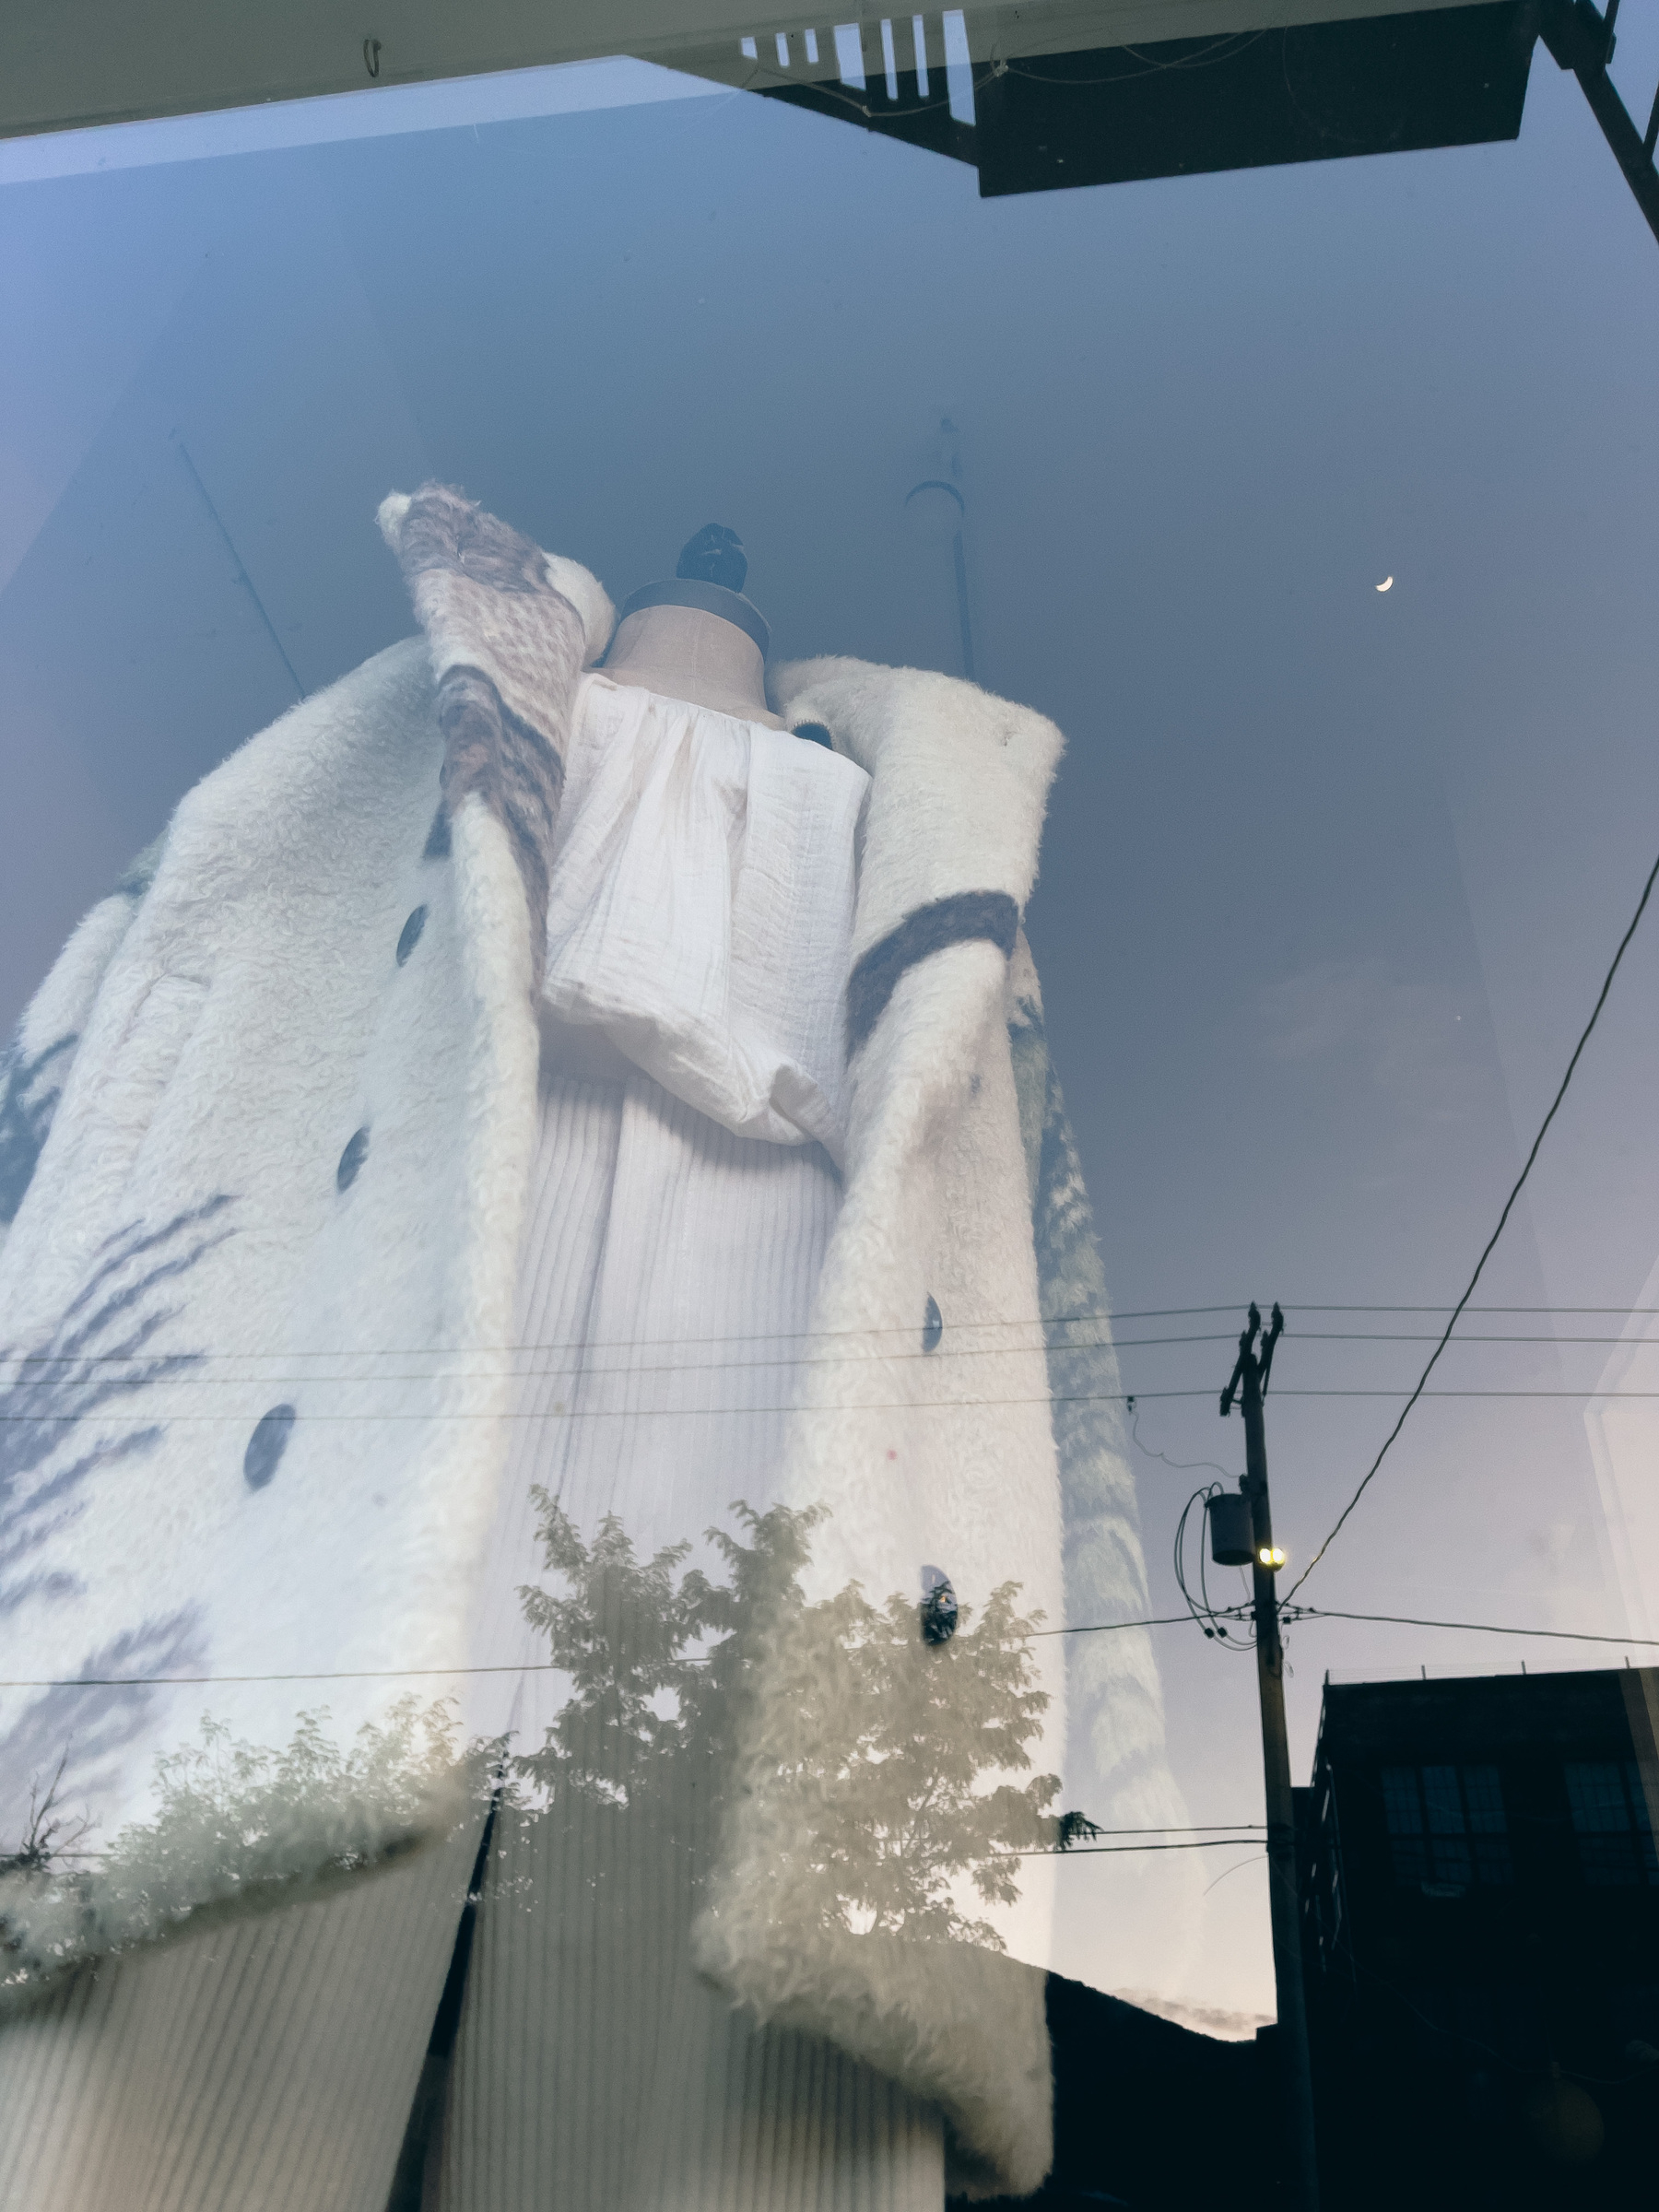 Off white corduroy pants, linen blouse and fleece jacket on a mannequin in a shop window. Building’s and moon reflections overlaid.